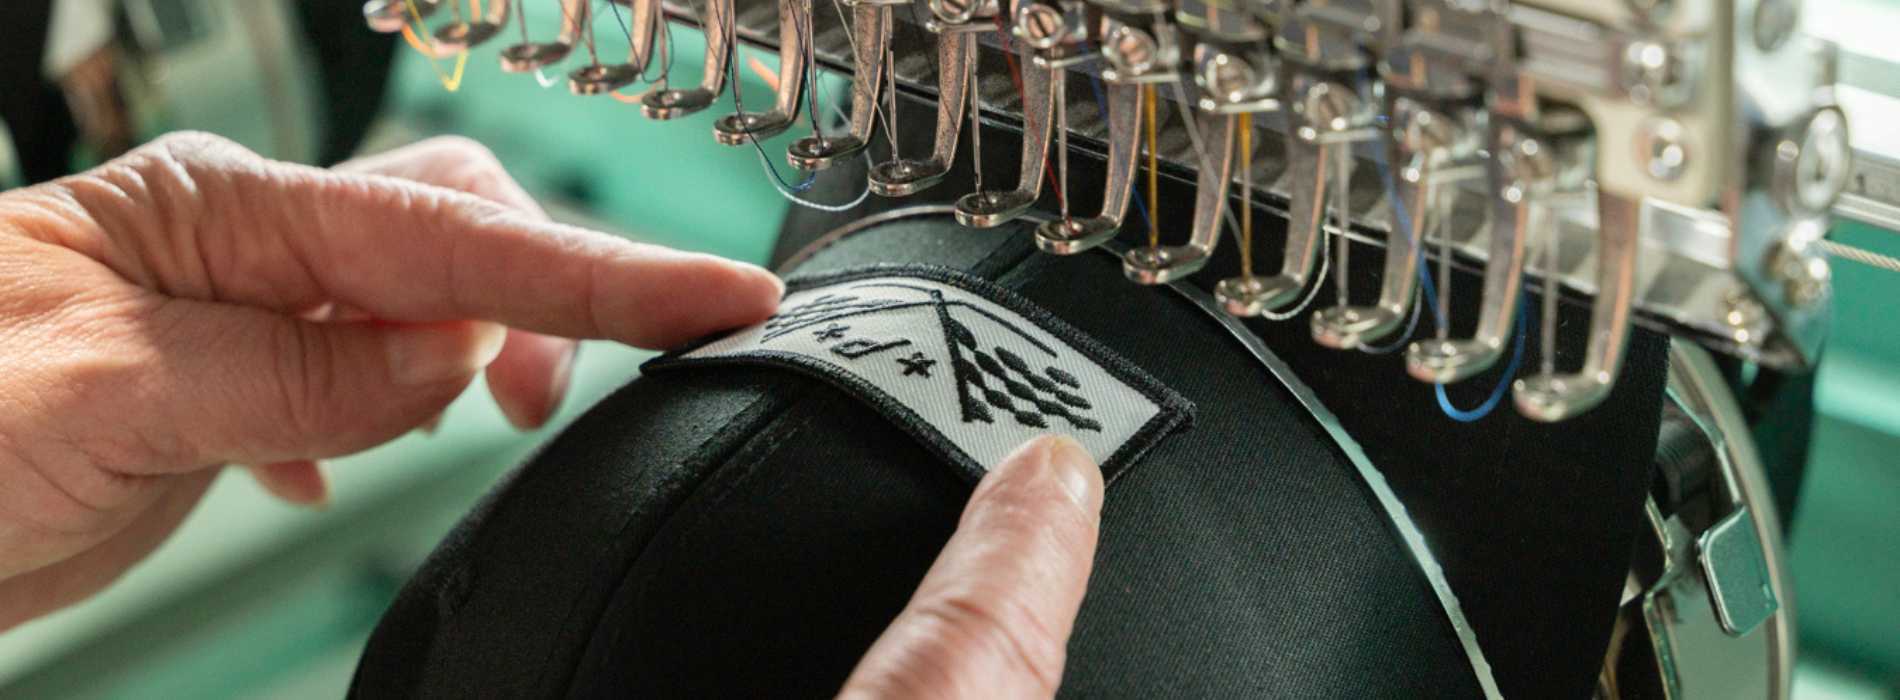 a black hat getting a logo embroidered on it by an embroidery machine